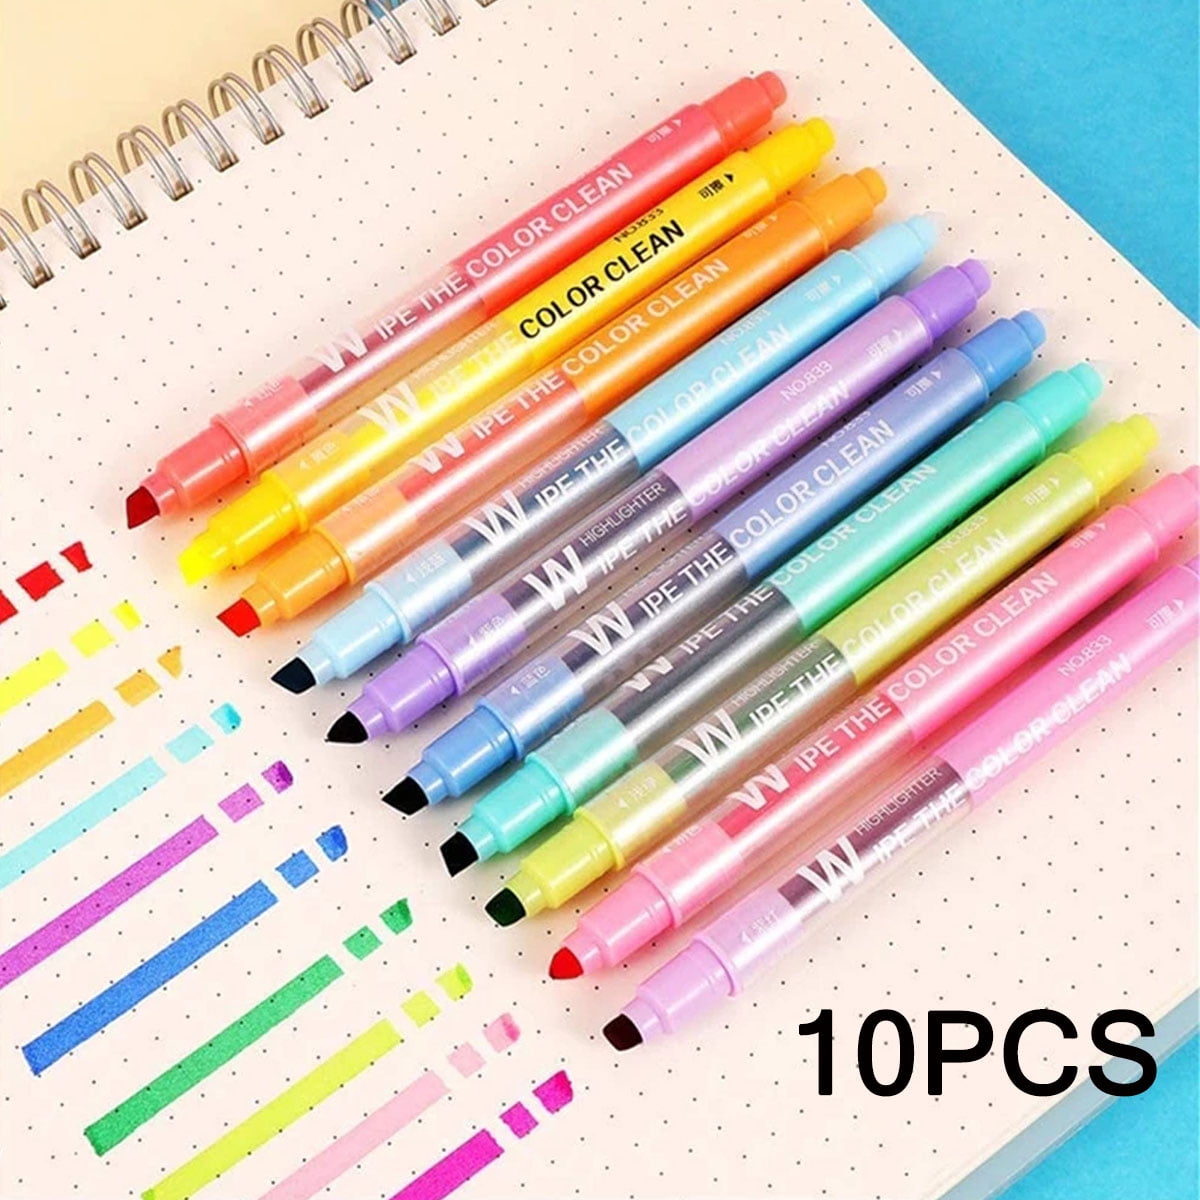 16pcs Minty Smell Highlighter Pen Set Soft Color Fluorescent Marker Liner  for Drawing Paint Office School